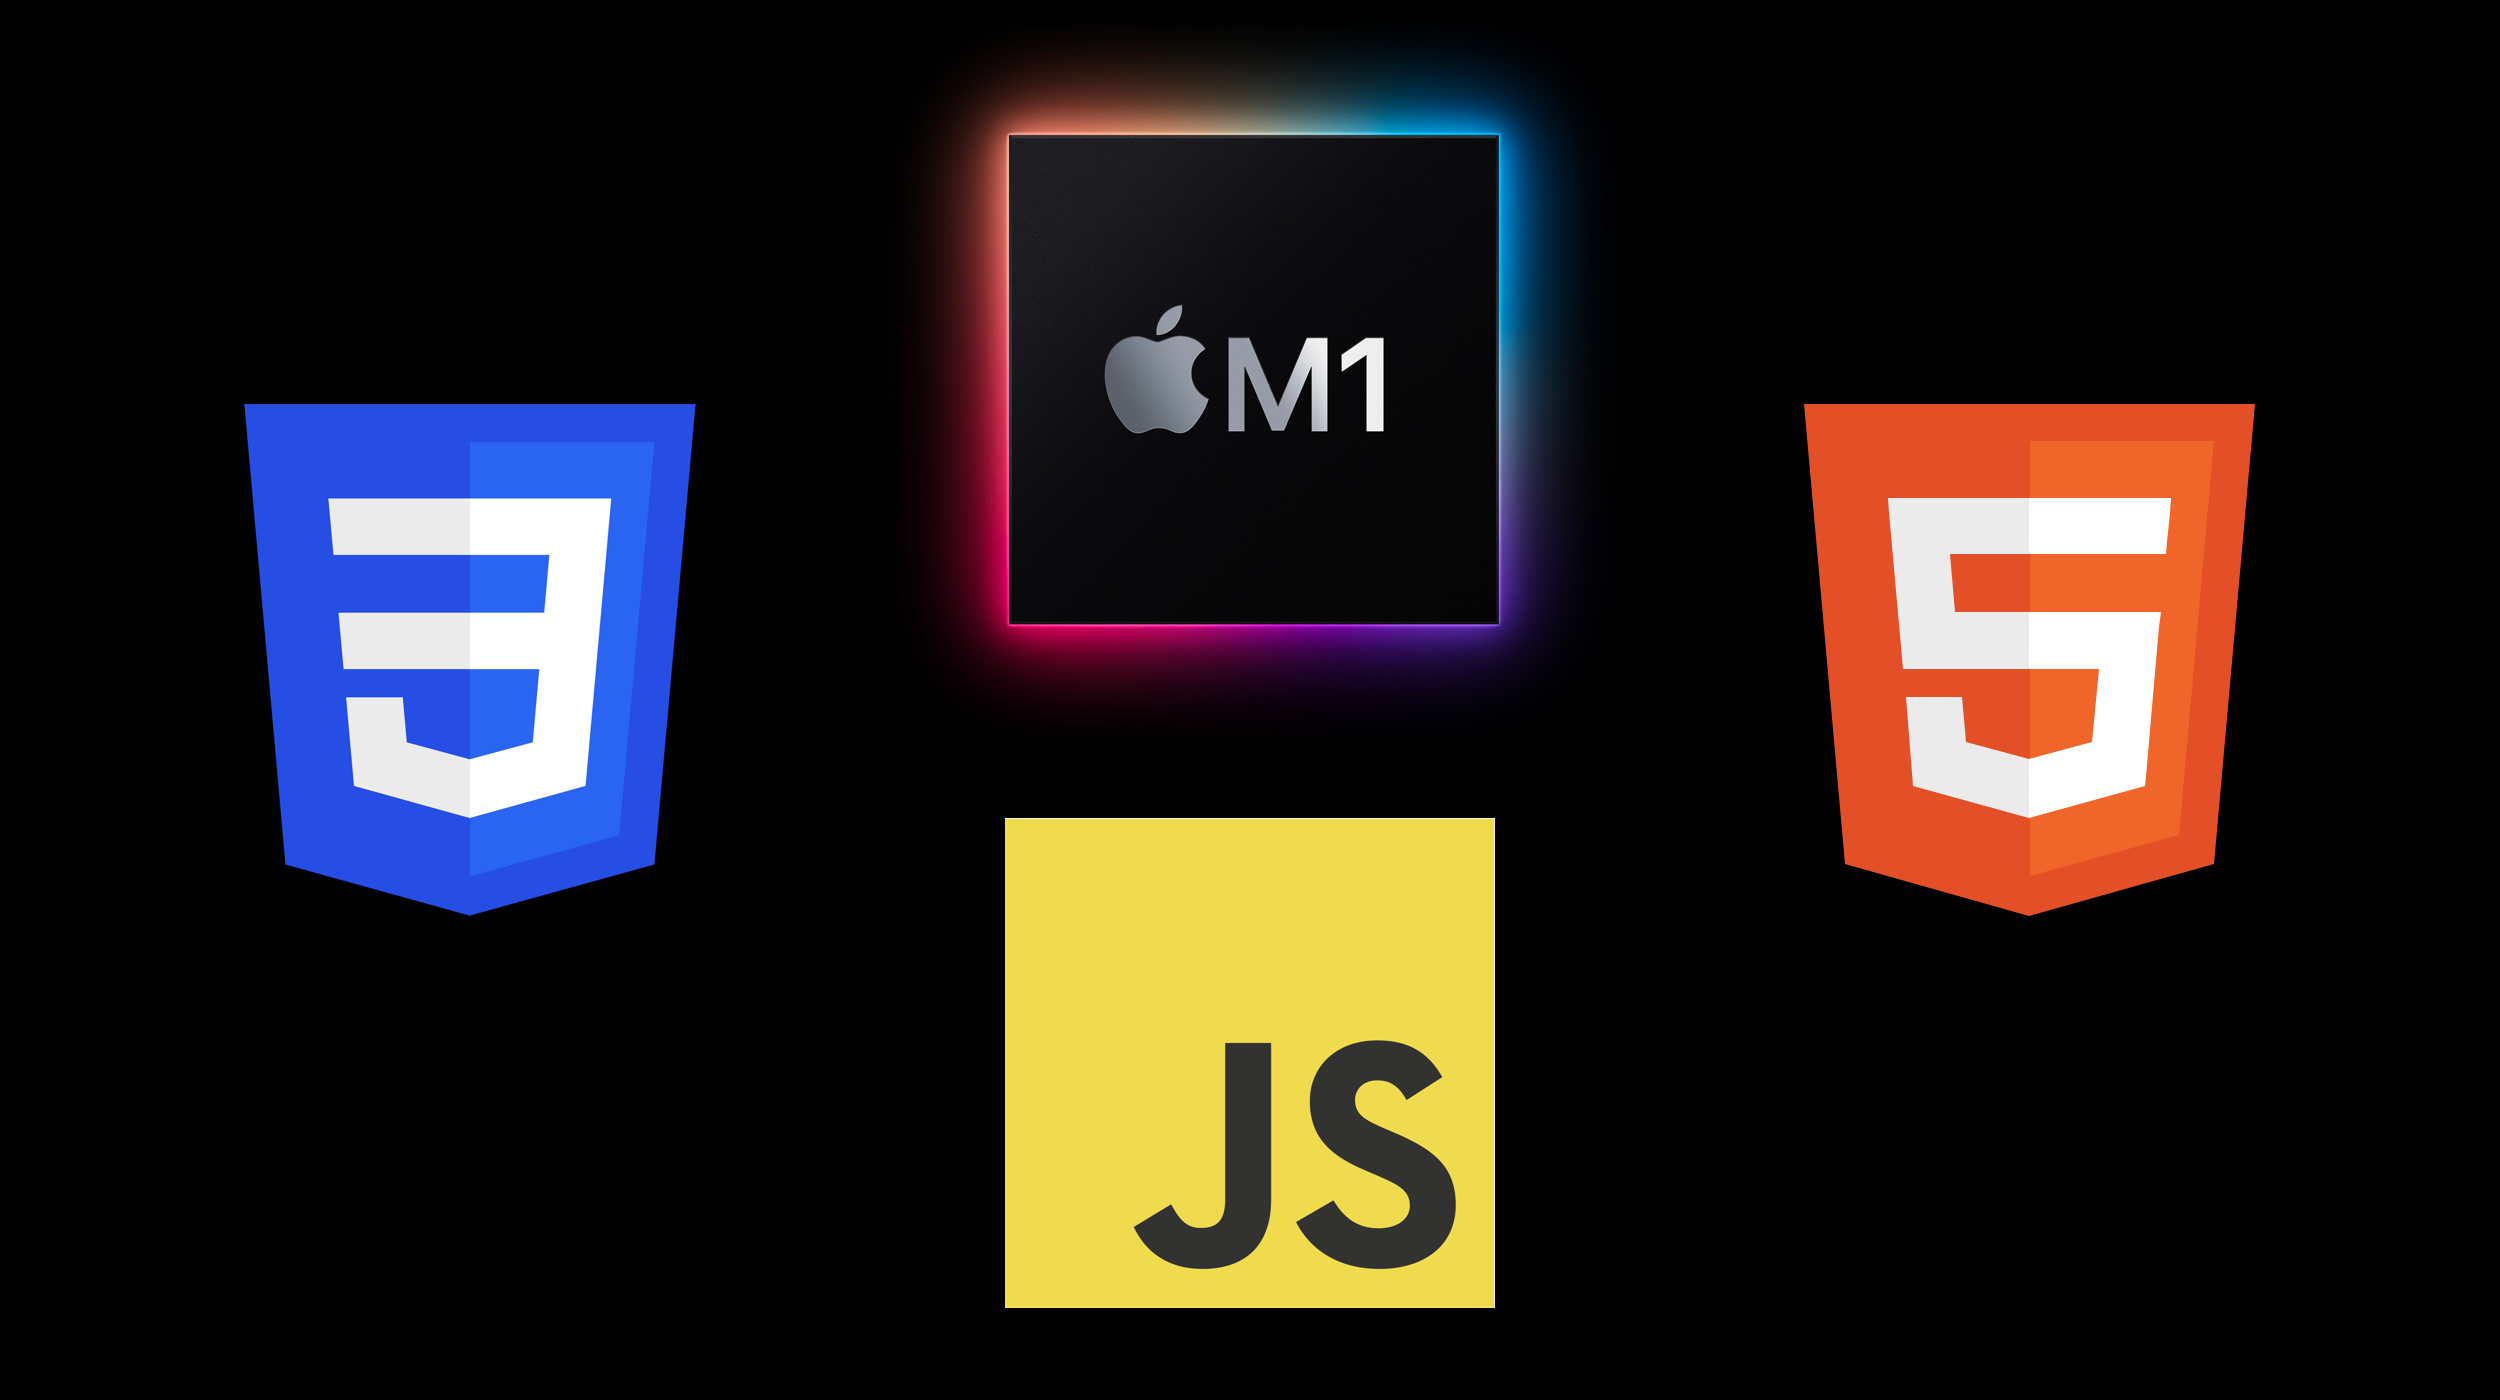 4 logos in a diamond layout on a black background. In a clockwise direction starting from the top, the M1 chip, HTML5, JacaScript, CSS3